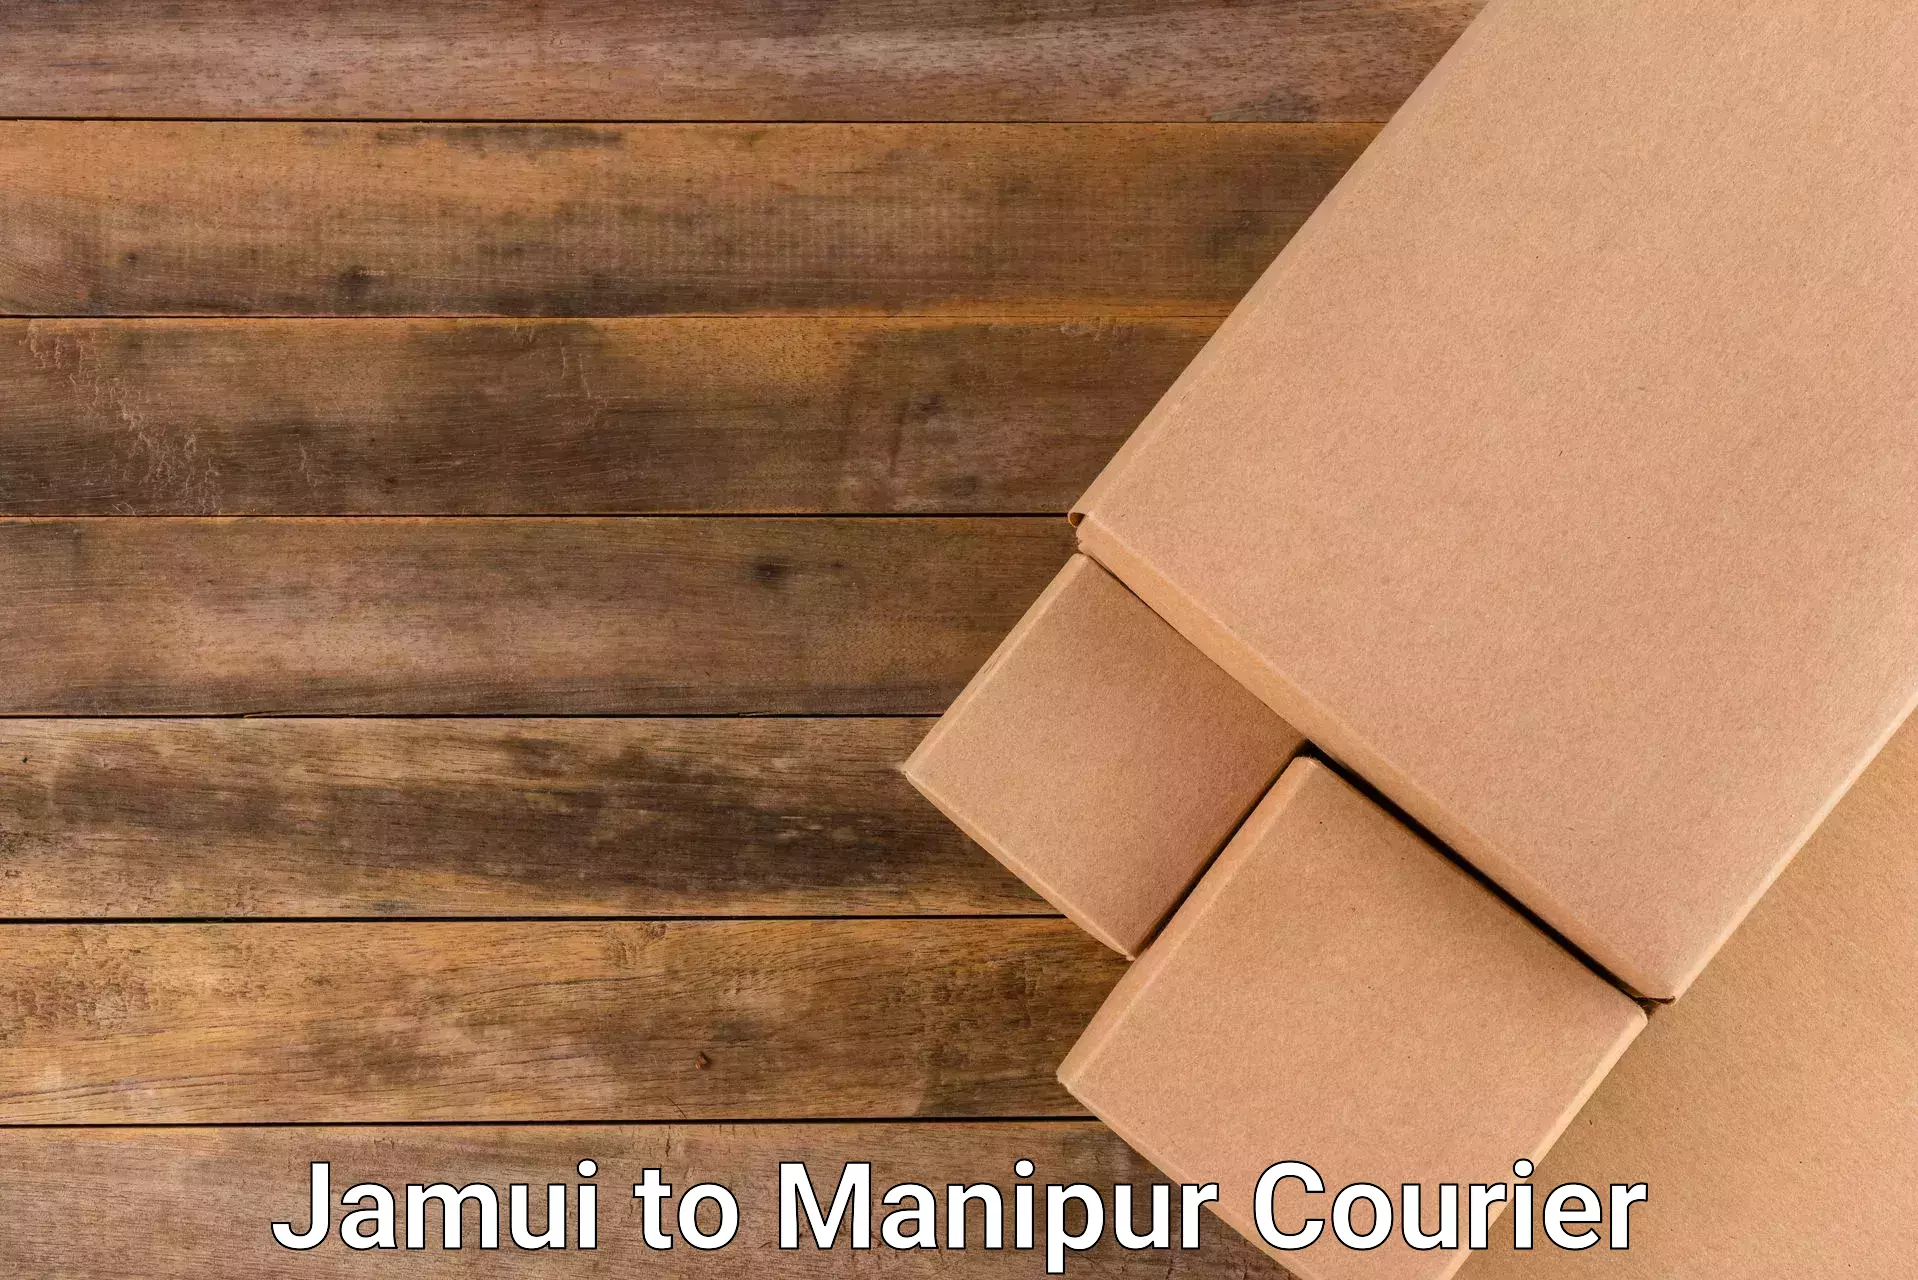 End-to-end delivery Jamui to Manipur